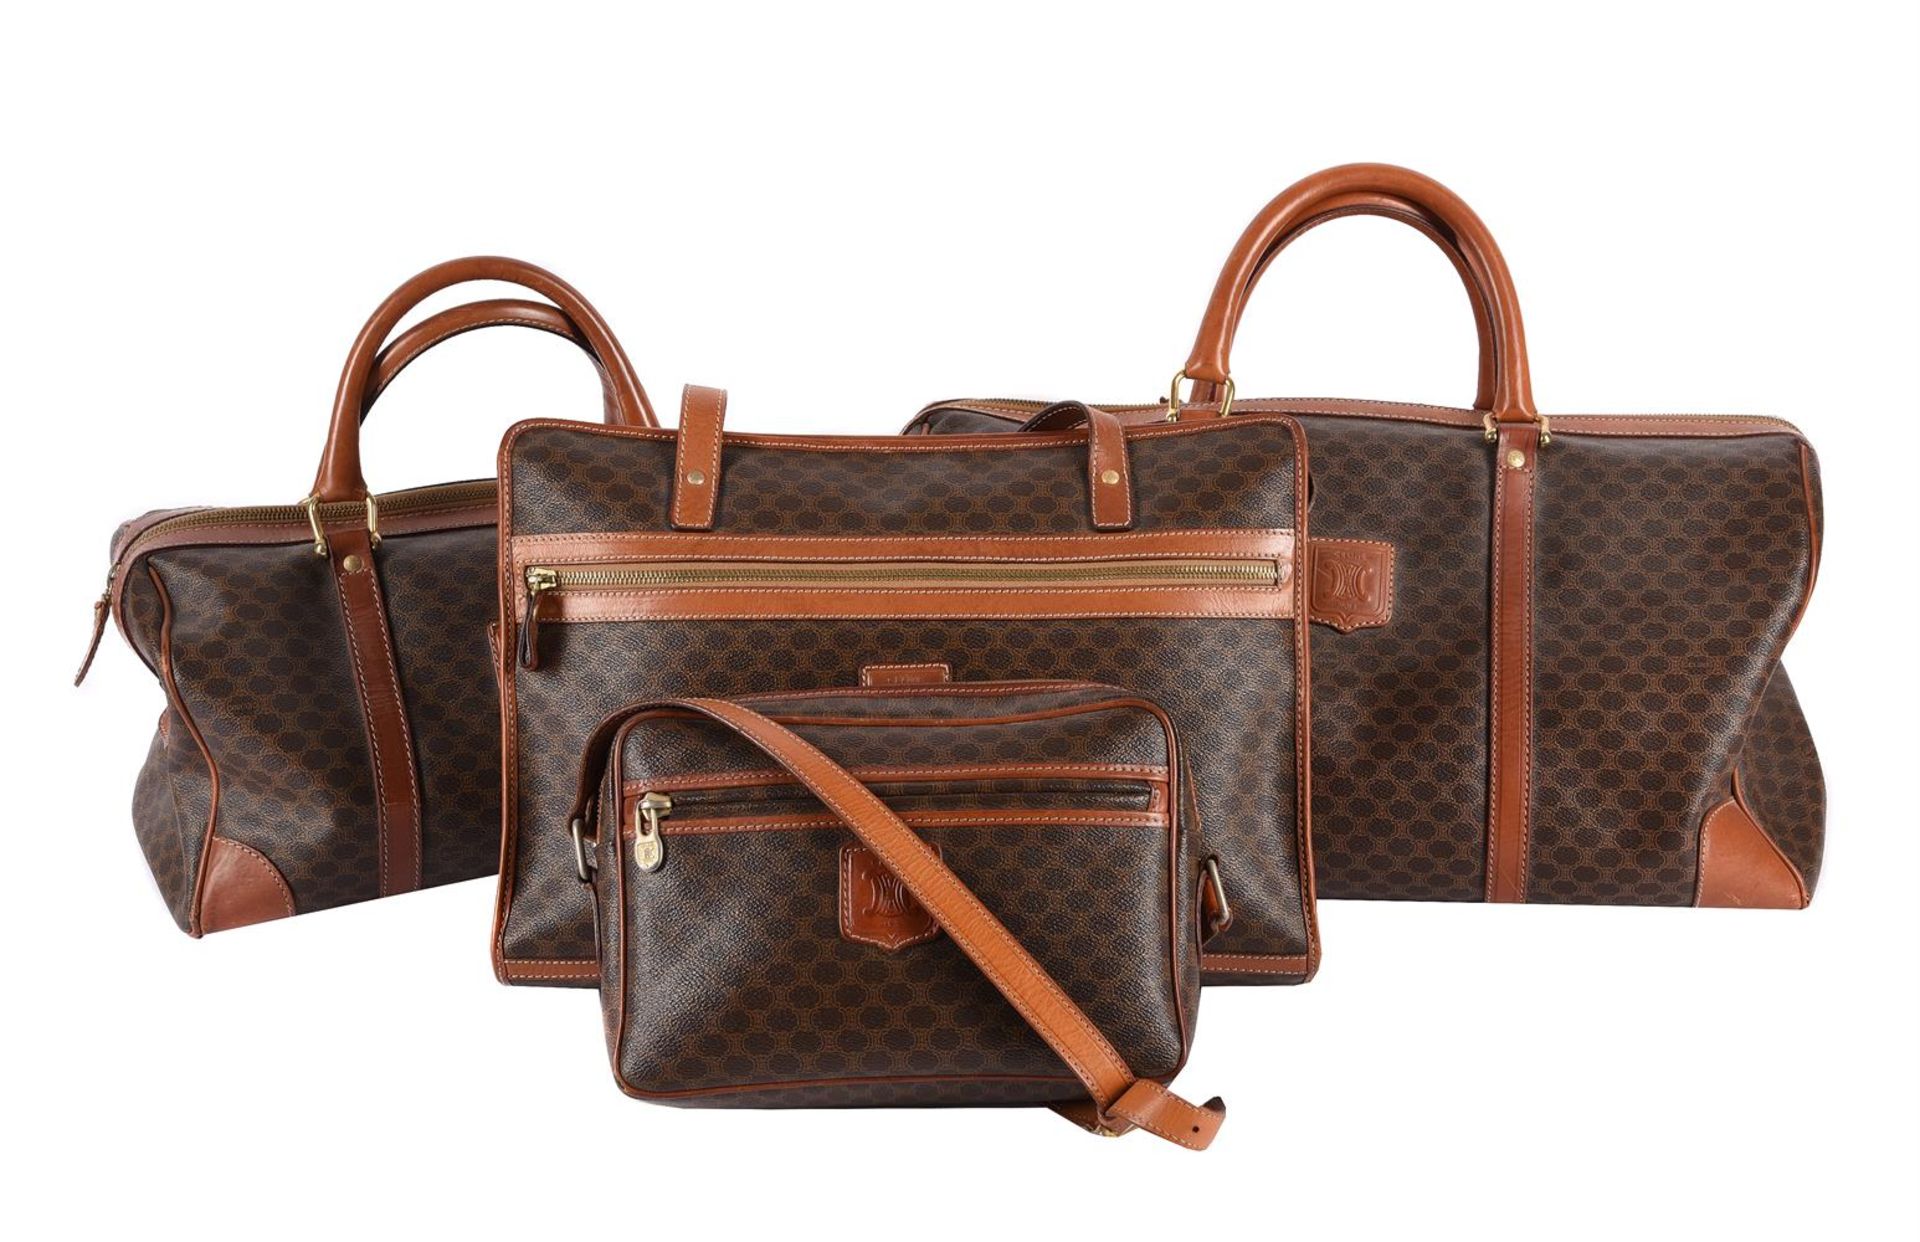 CELINE, A COATED CANVAS FOUR PIECE TRAVELLING LUGGAGE SET